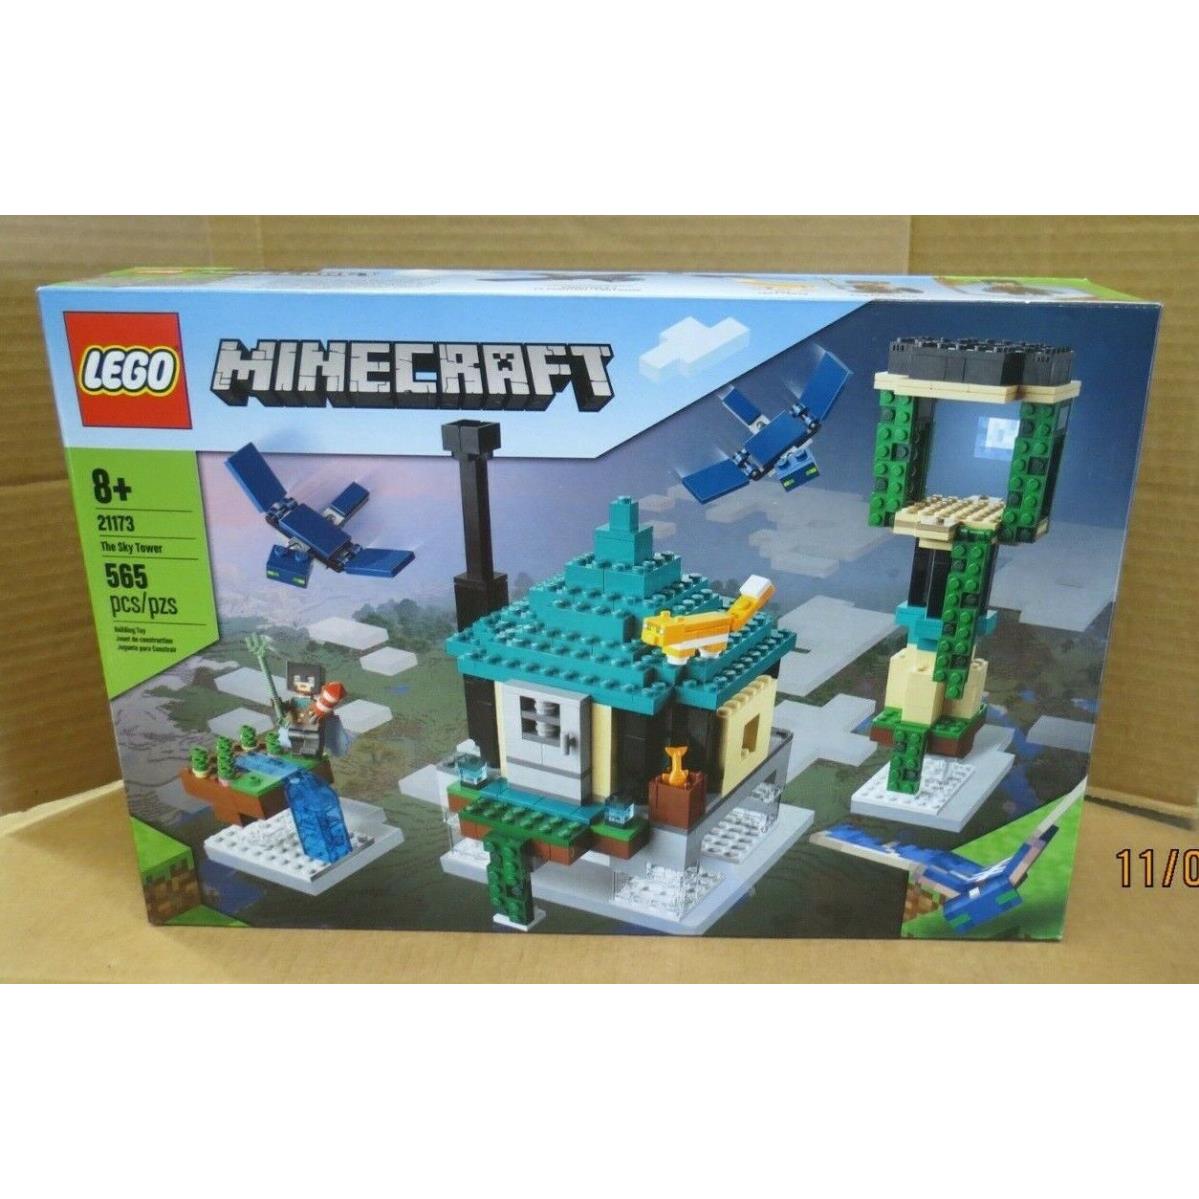 Lego Minecraft 21173 The Sky Tower 565 Pieces Building Toy